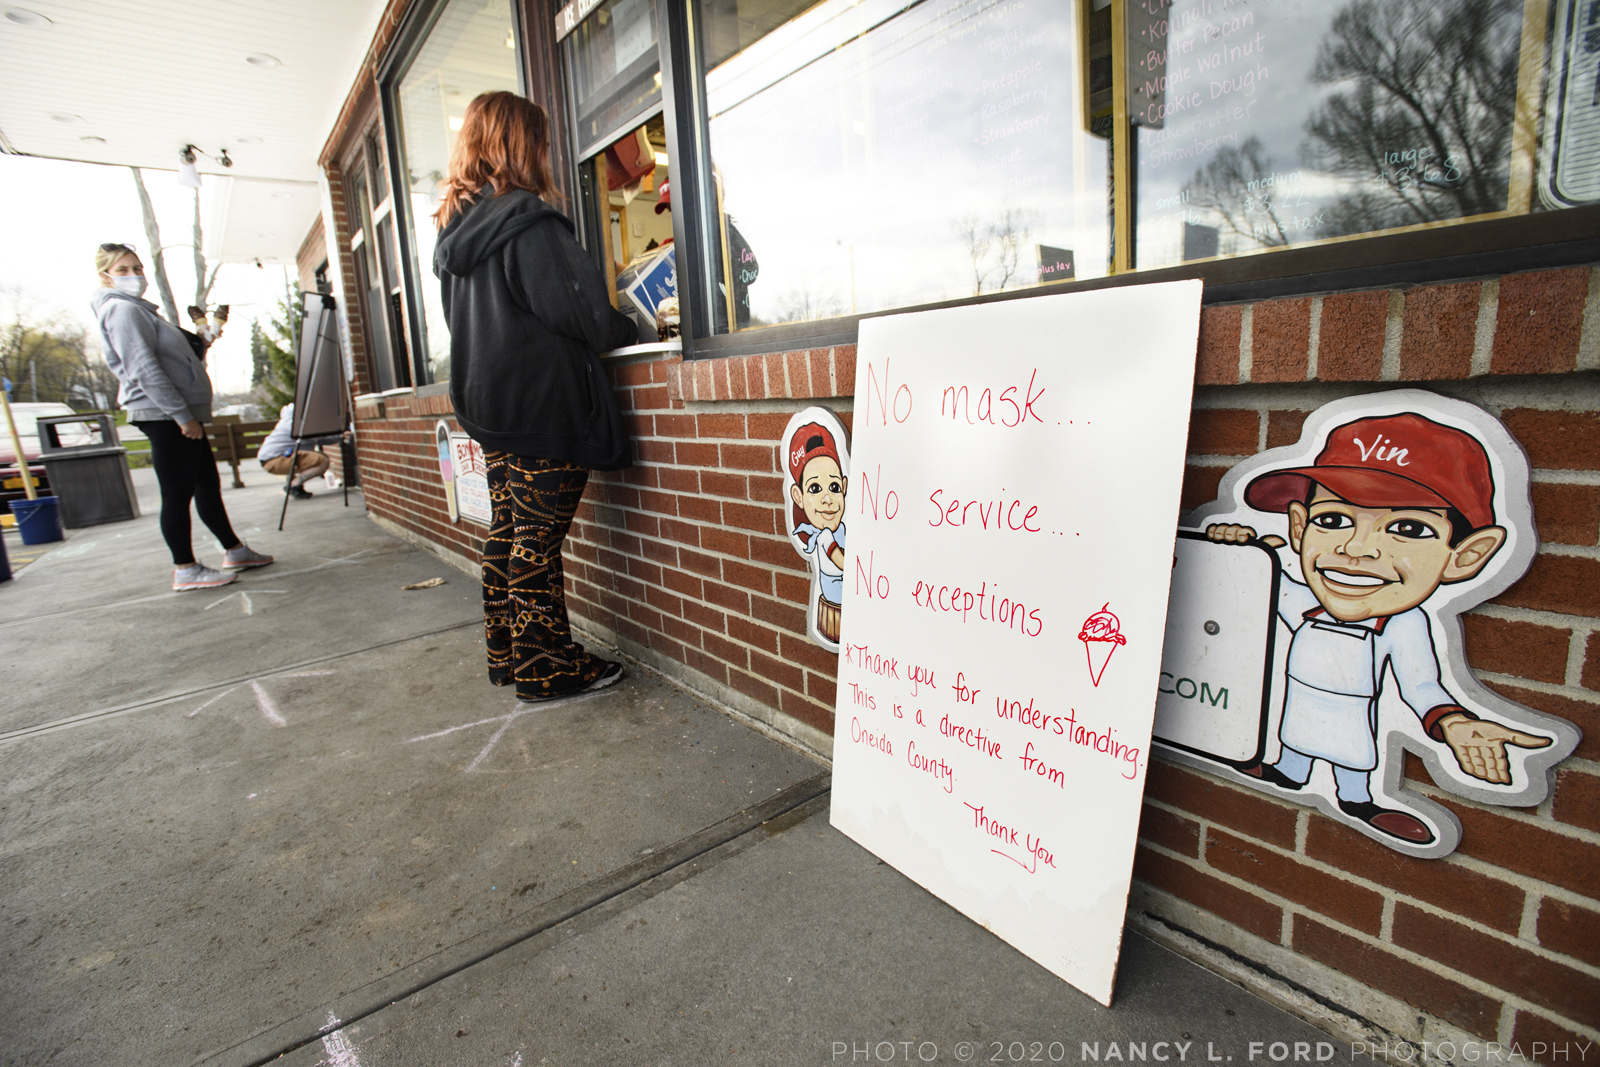 Bonomo's Dari Creme displays a sign “No mask, no Ice cream” on Monday, April 28, 2020 in Clinton, NY. during the social distancing mandate and Covid-19 pandemic. (Copyright © 2020 Nancy L. Ford Photography)